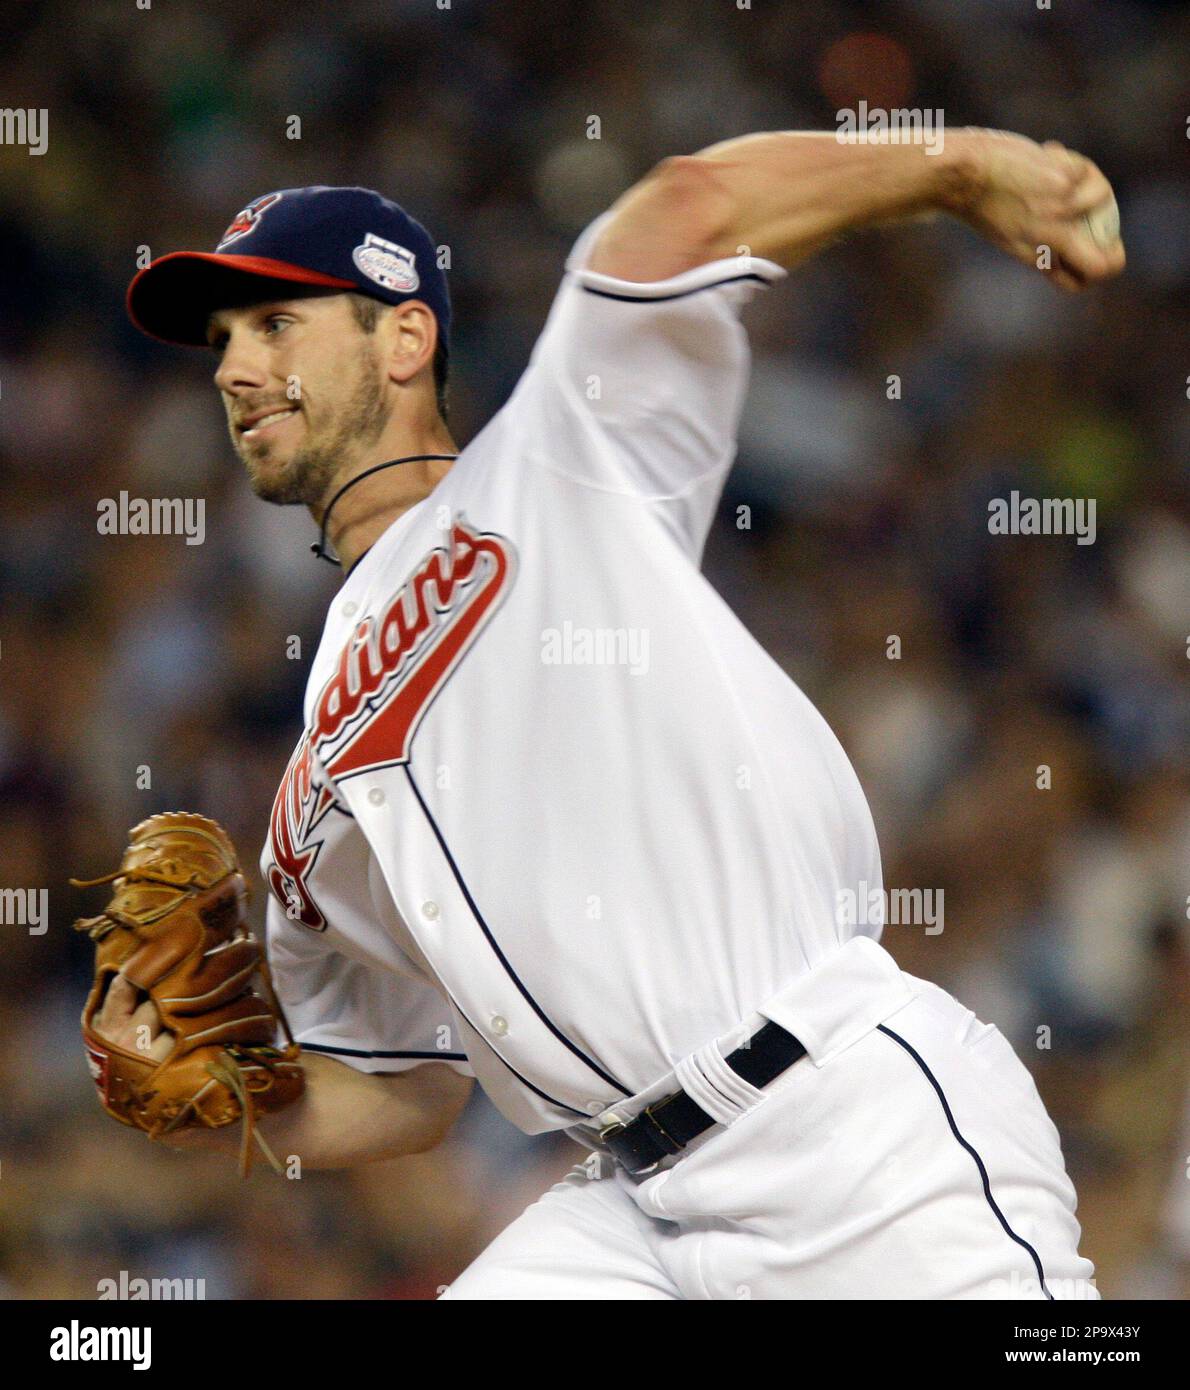 Cleveland Indians' Cliff Lee, of the American League team, pitches